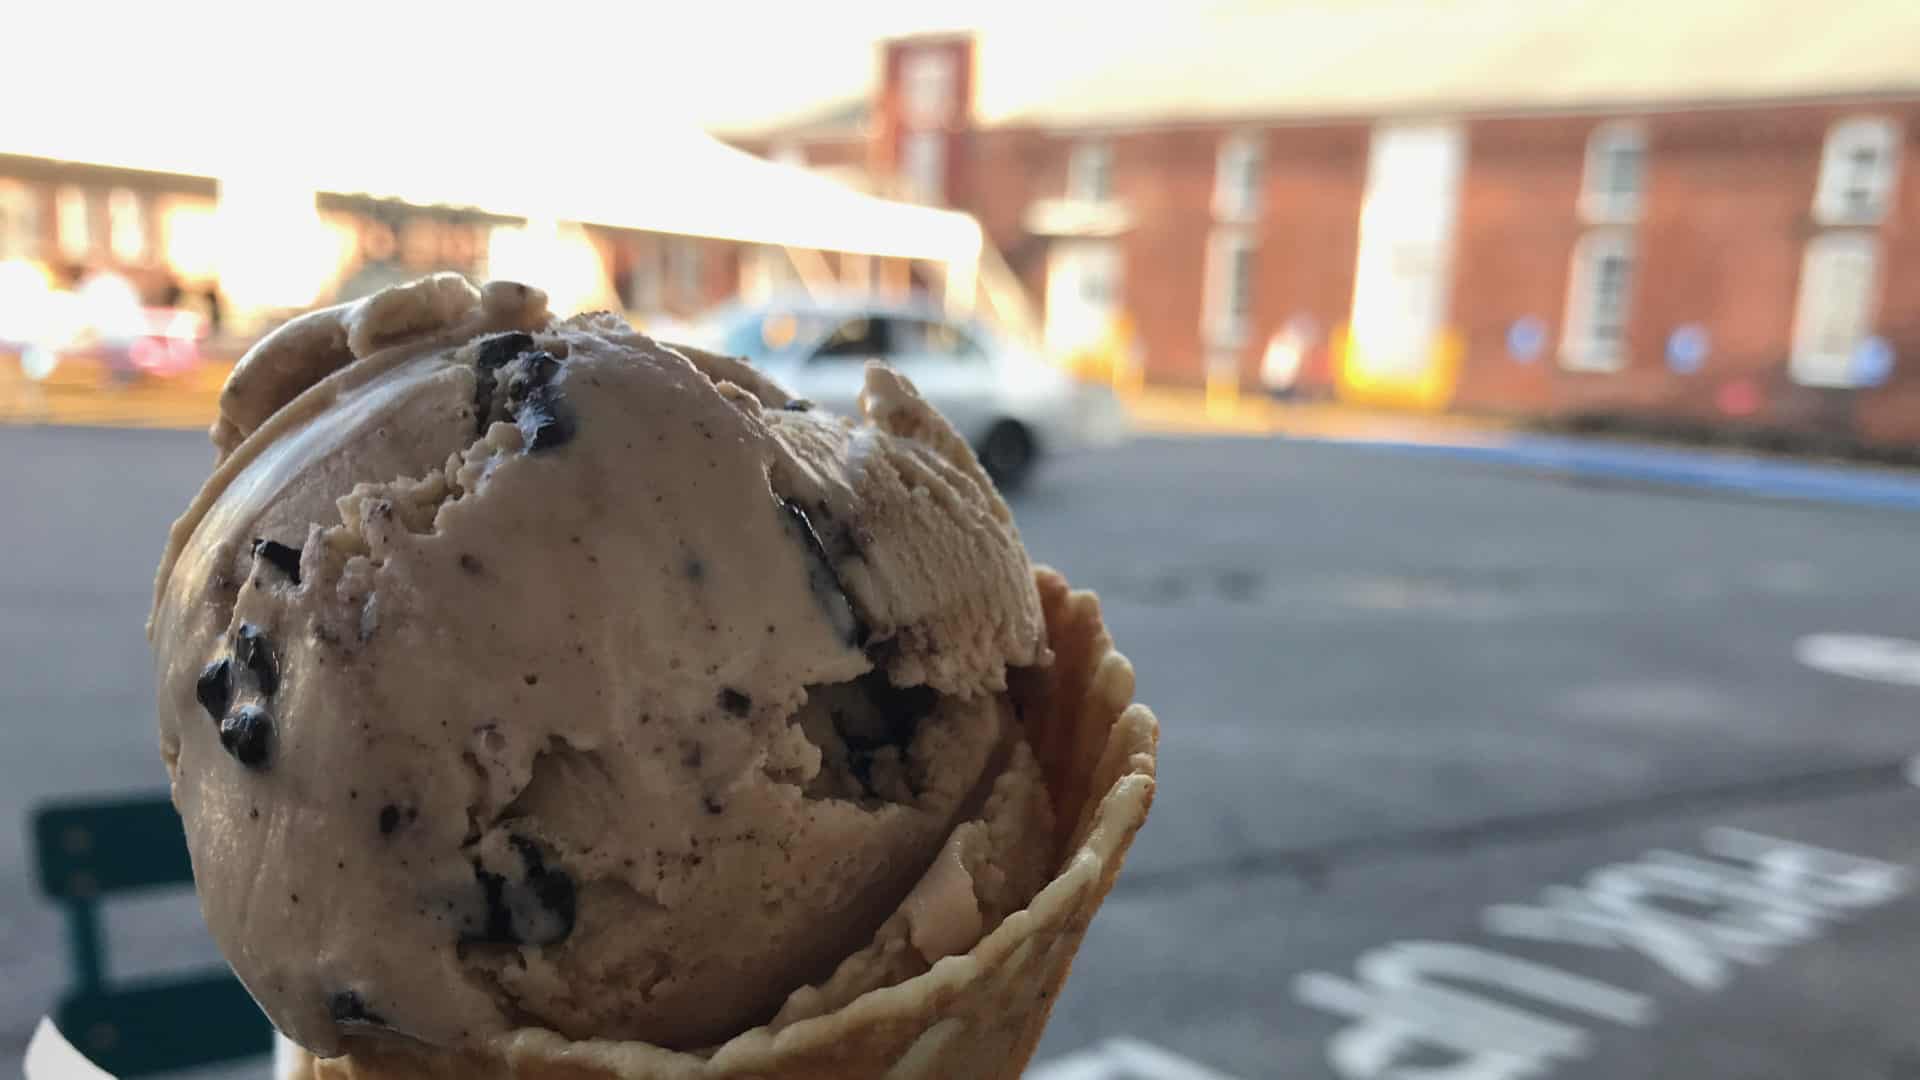 Tunnel City Coffee in the Mass MoCA courtyard serves local ice cream from High Lawn Farm in Lee.